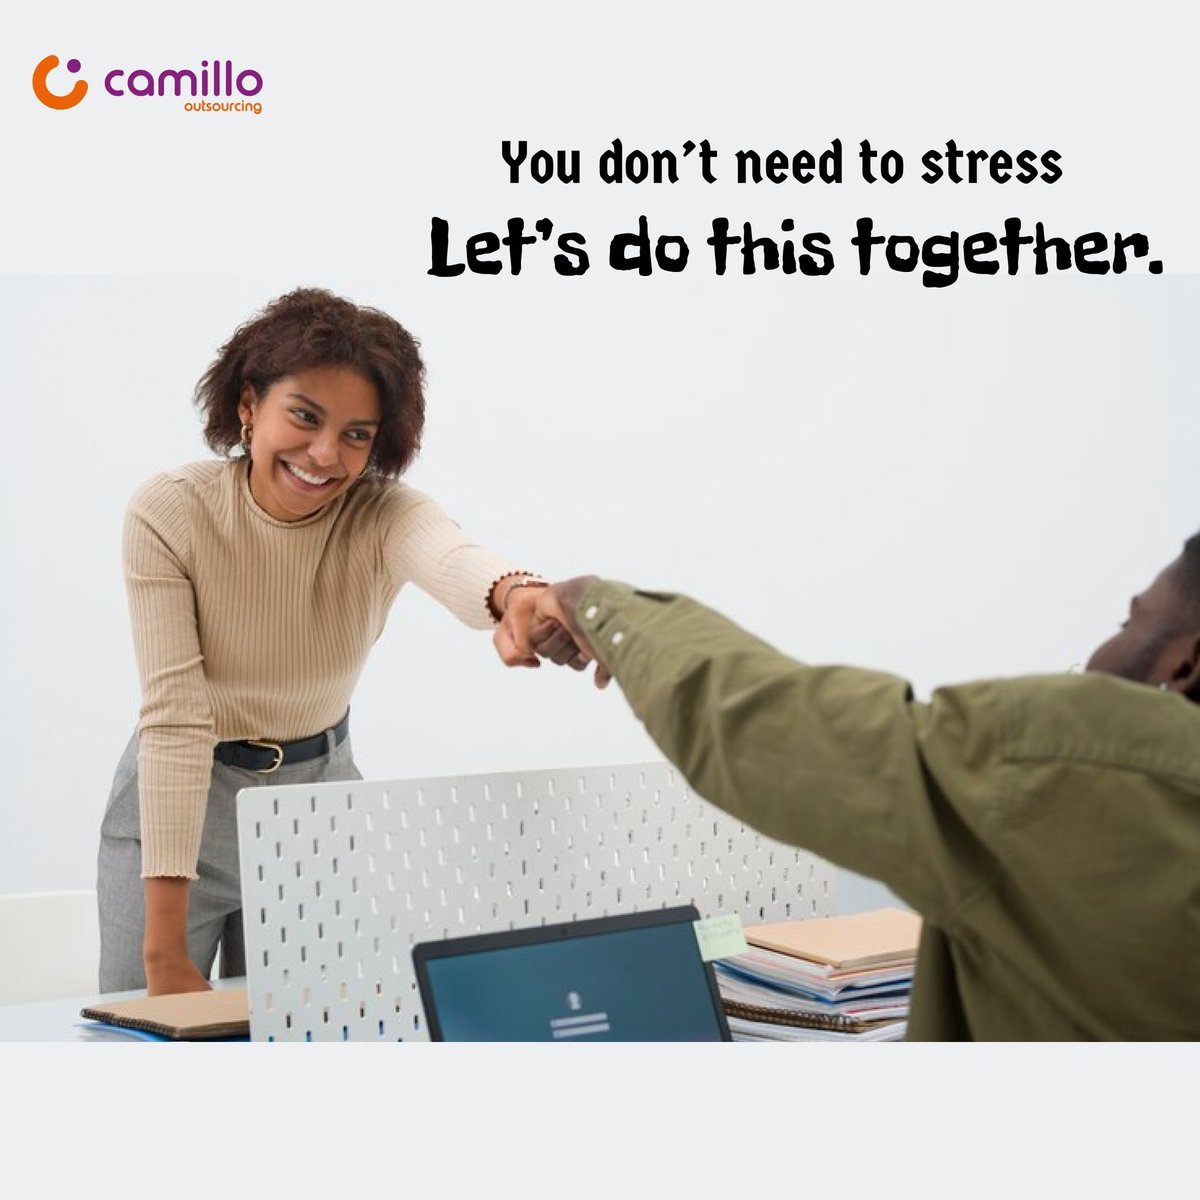 PARTNER WITH CAMILLO OUTSOURCING TODAY!

info@camillo.ng
0201-343-8060
0201-343-8061

#camillo #outsource #outsourcingpartner   #humanresource #businessprocess #businessowner  #businesspartner